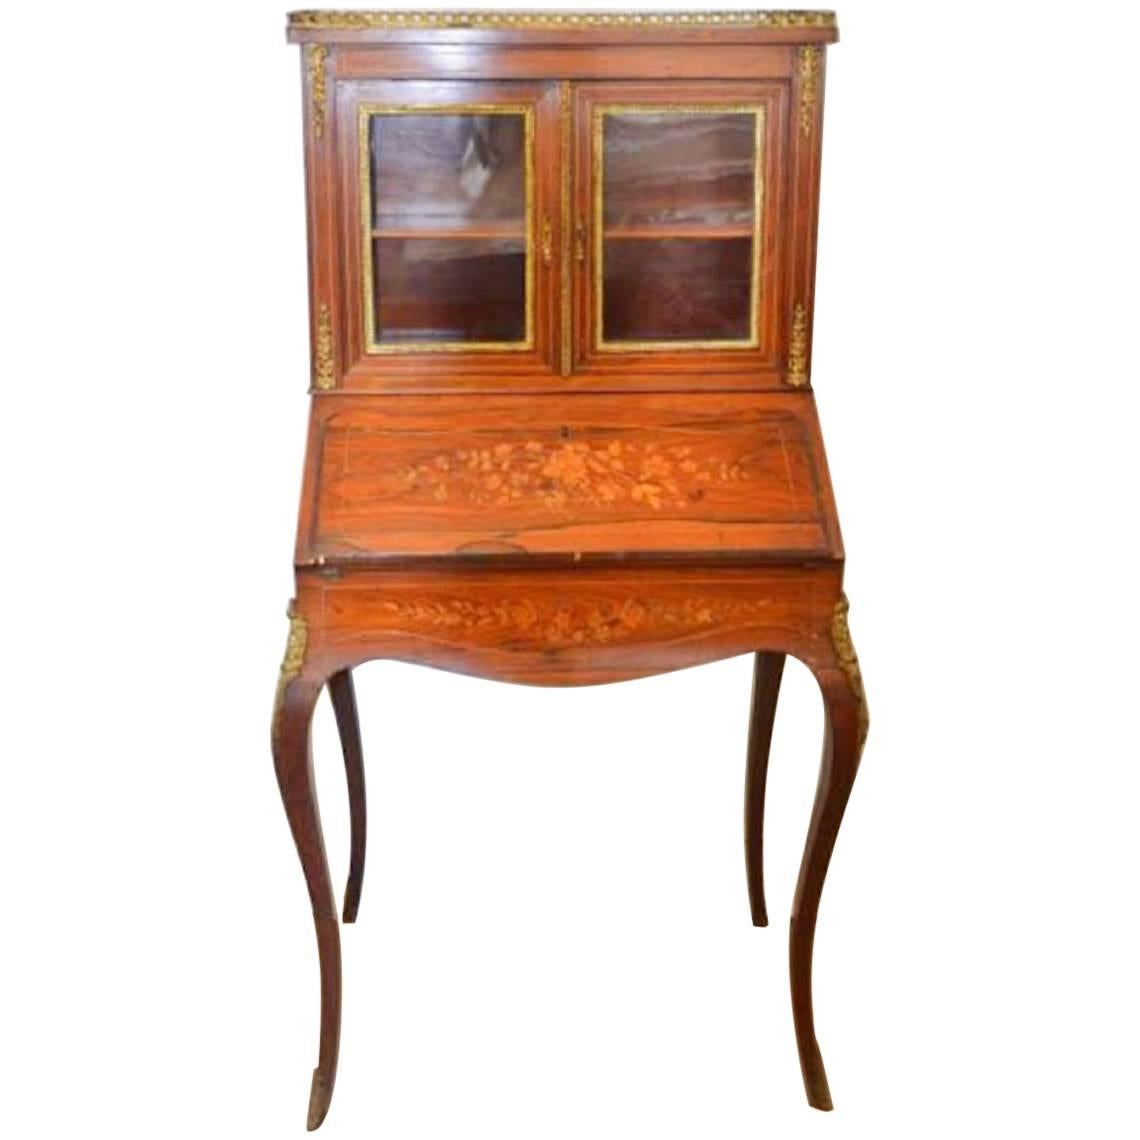 19th Century French Rosewood and Marquetry Bureau de Dame in Napoleon III Style